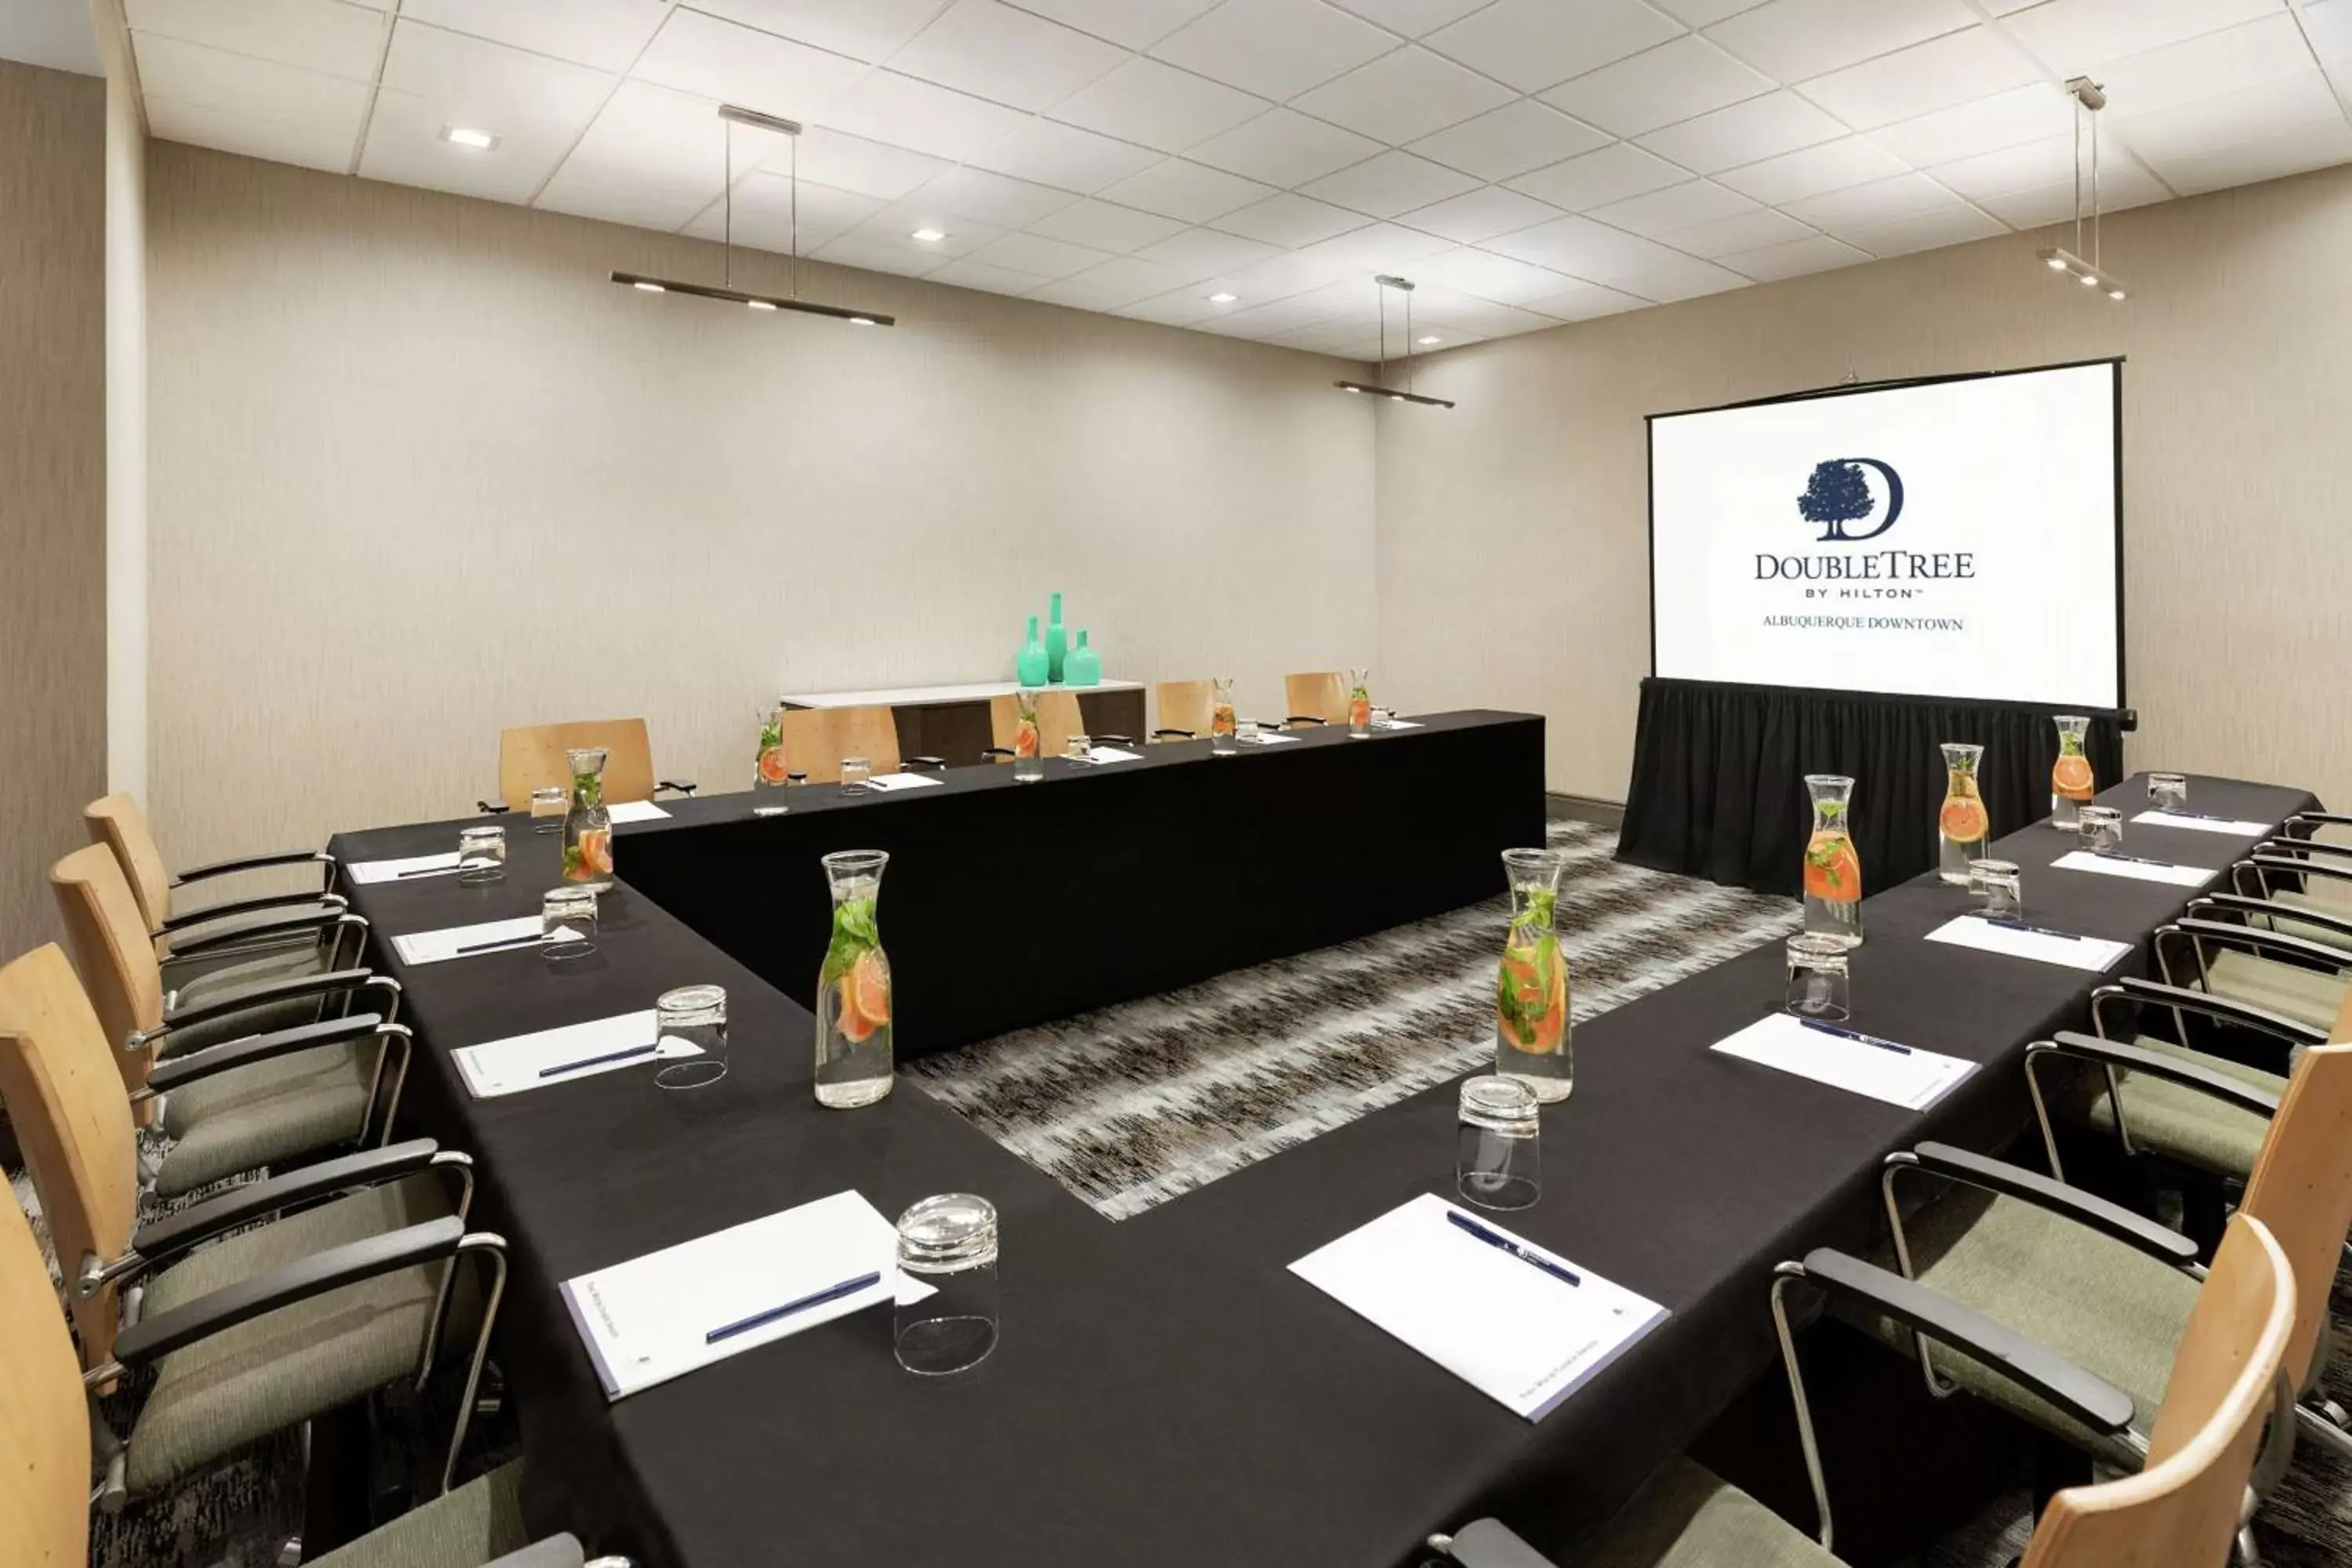 Meeting/conference room, Business Area/Conference Room in DoubleTree by Hilton Hotel Albuquerque